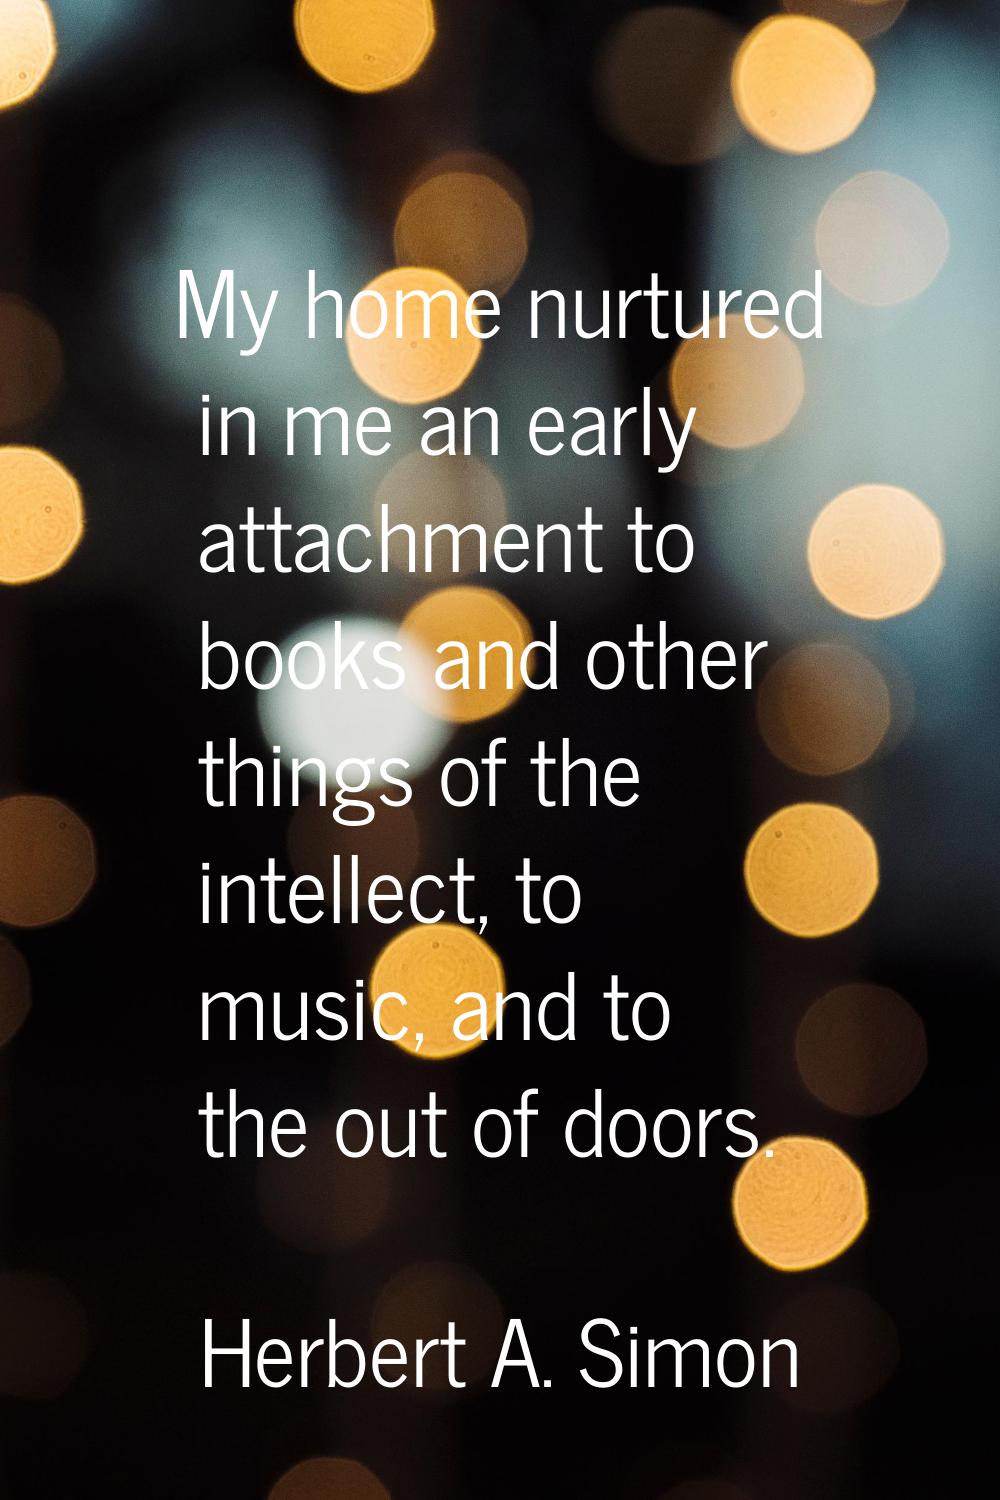 My home nurtured in me an early attachment to books and other things of the intellect, to music, an